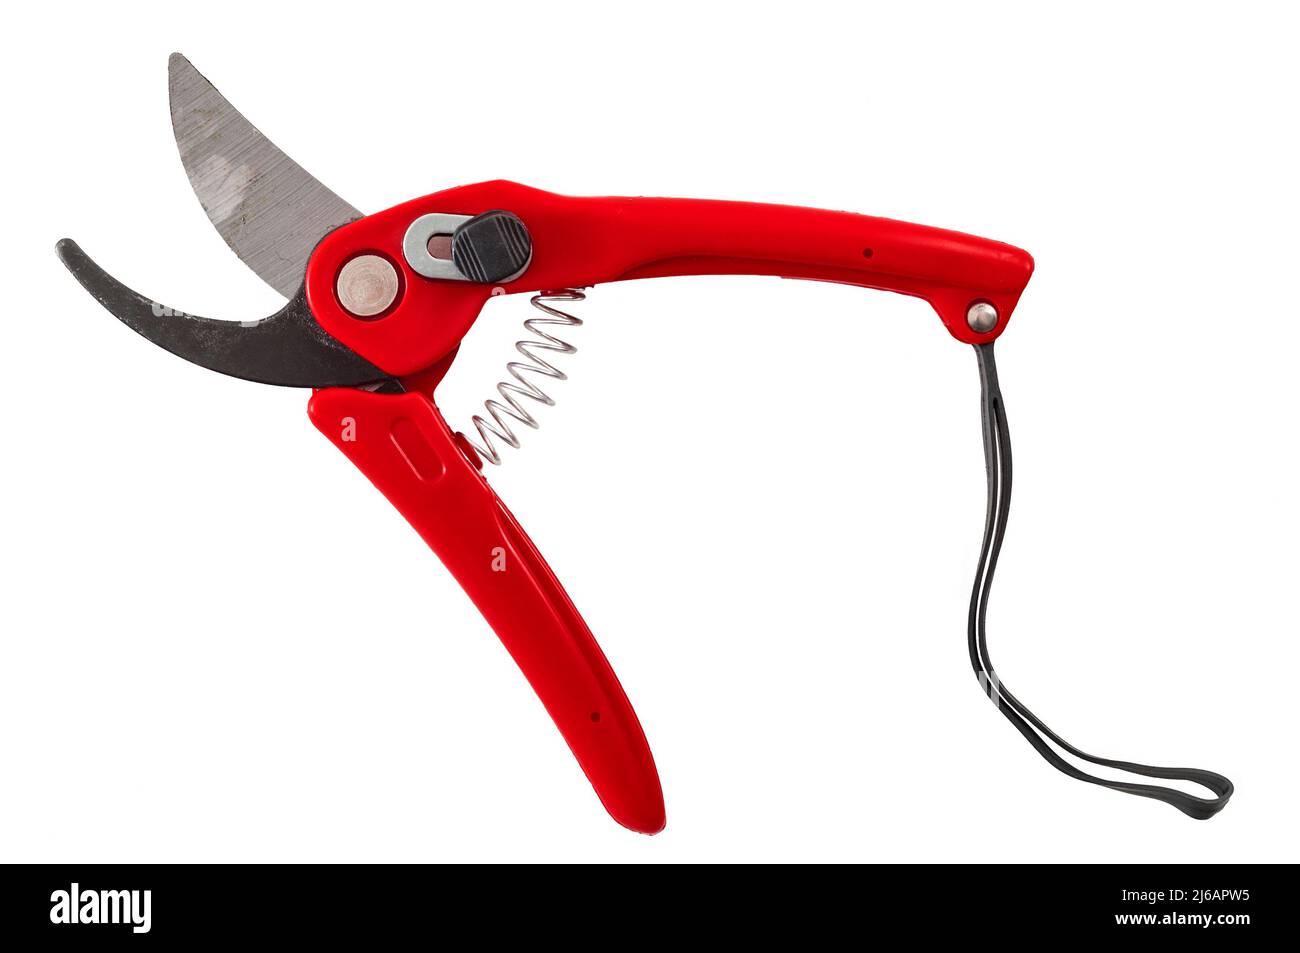 Red pruning shears, garden secateurs or hand pruners are garden tools used in gardening for cutting tree branches and landscaping gardens, isolated on Stock Photo